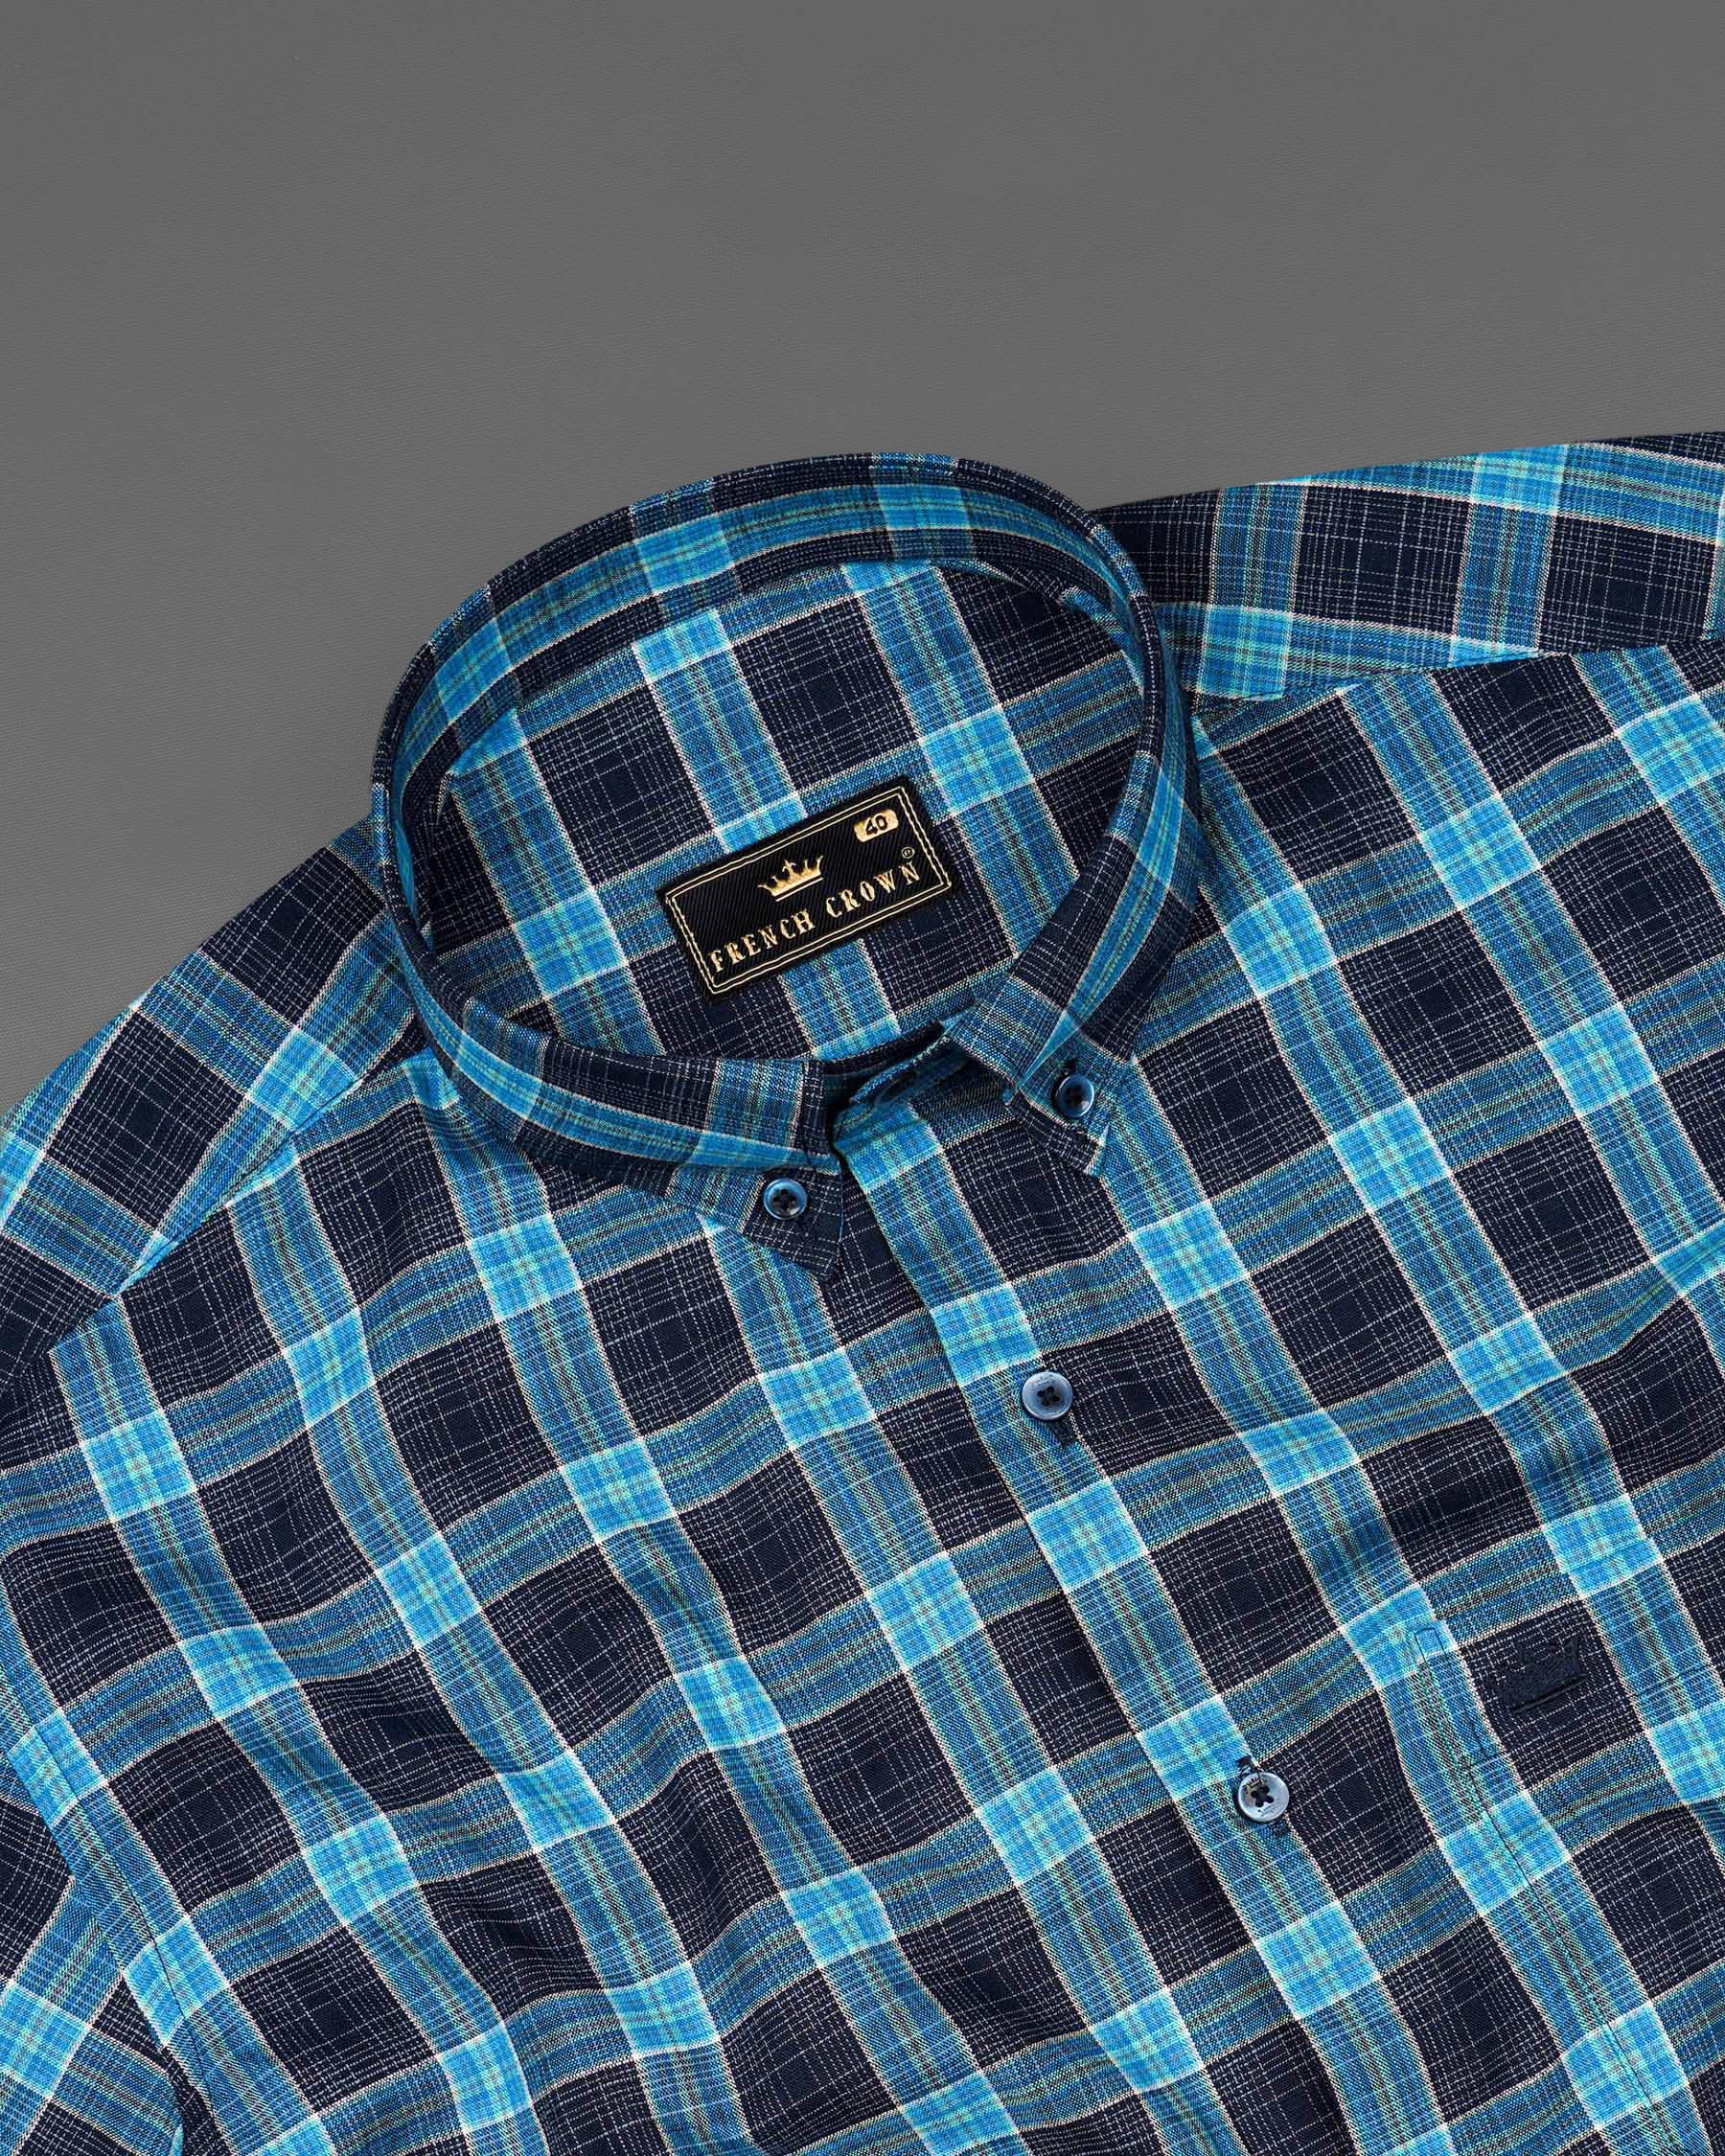 Mirage Navy Blue and Pacific Blue Plaid Dobby Textured Premium Giza Cotton Shirt 7701-BD-BLE-38, 7701-BD-BLE-H-38, 7701-BD-BLE-39,7701-BD-BLE-H-39, 7701-BD-BLE-40, 7701-BD-BLE-H-40, 7701-BD-BLE-42, 7701-BD-BLE-H-42, 7701-BD-BLE-44, 7701-BD-BLE-H-44, 7701-BD-BLE-46, 7701-BD-BLE-H-46, 7701-BD-BLE-48, 7701-BD-BLE-H-48, 7701-BD-BLE-50, 7701-BD-BLE-H-50, 7701-BD-BLE-52, 7701-BD-BLE-H-52